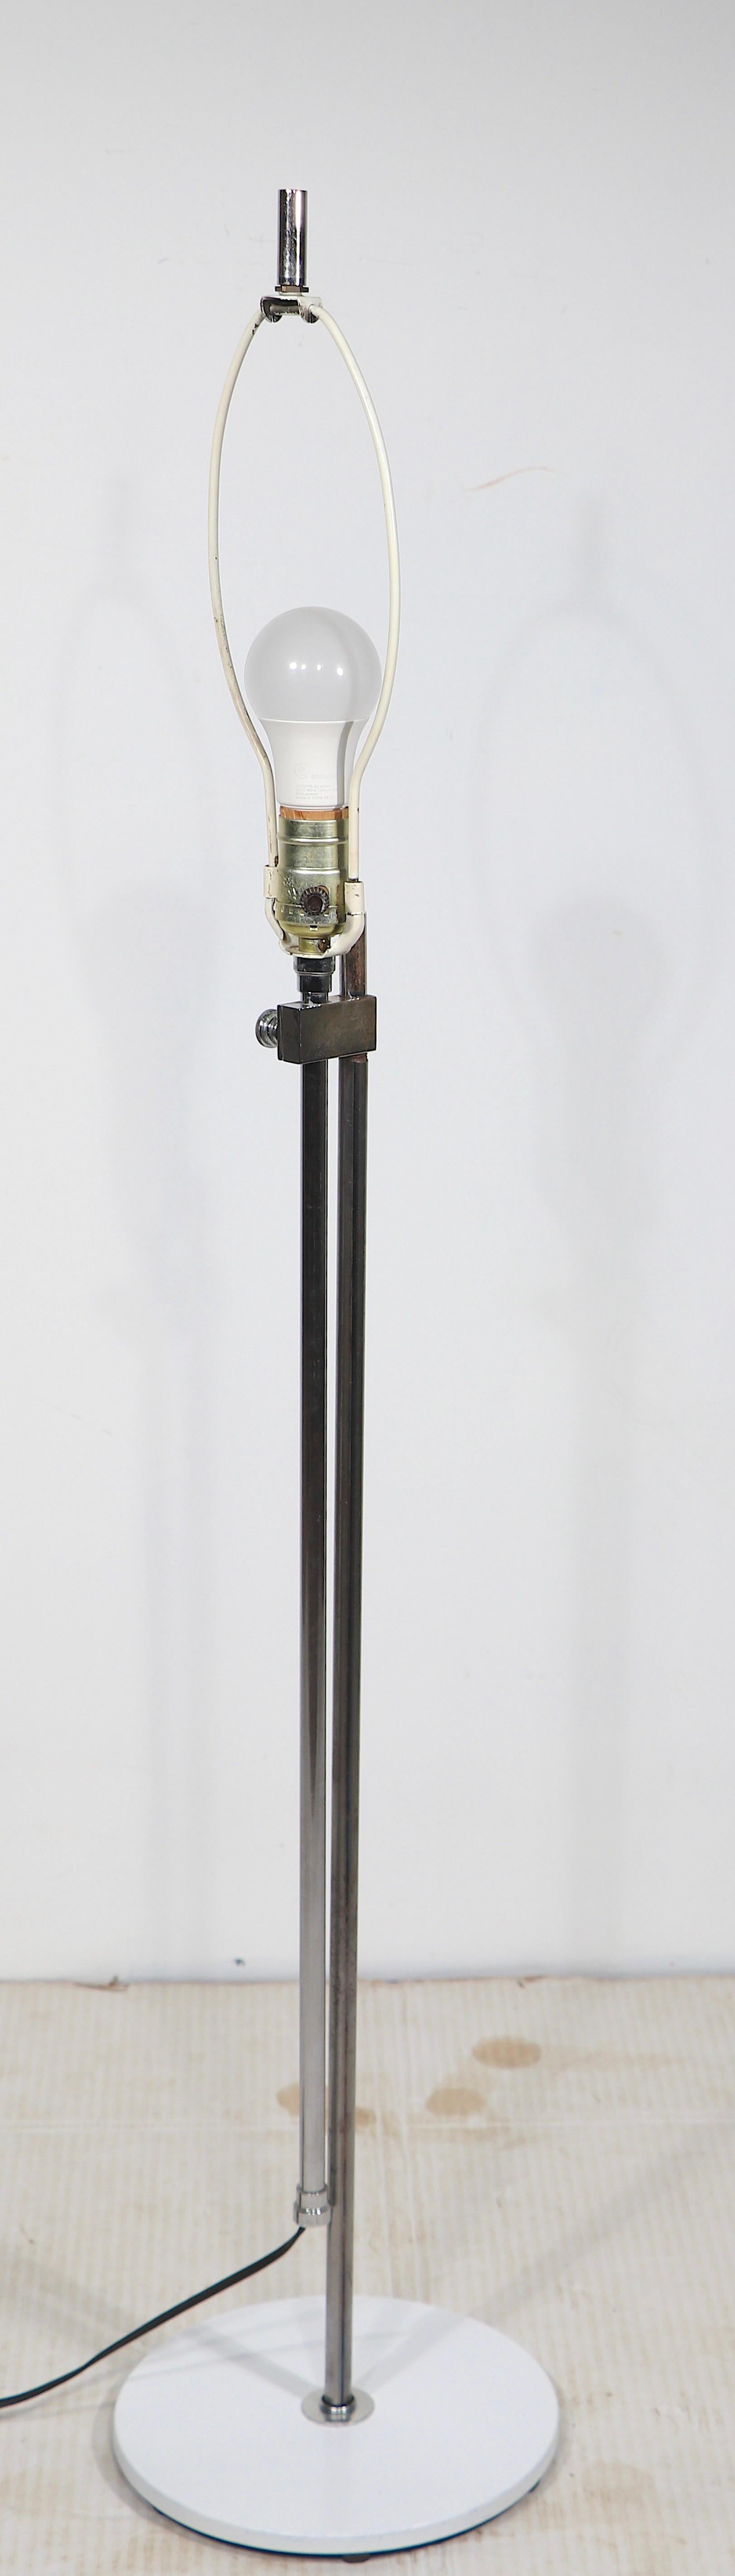 Post Modern chrome and steel adjustable floor lamp, having a painted white round metal base, with two vertical  tubular chrome elements, having a connecting  joint,  which allows the height to be adjusted. In the style of George Kovacs, Robert